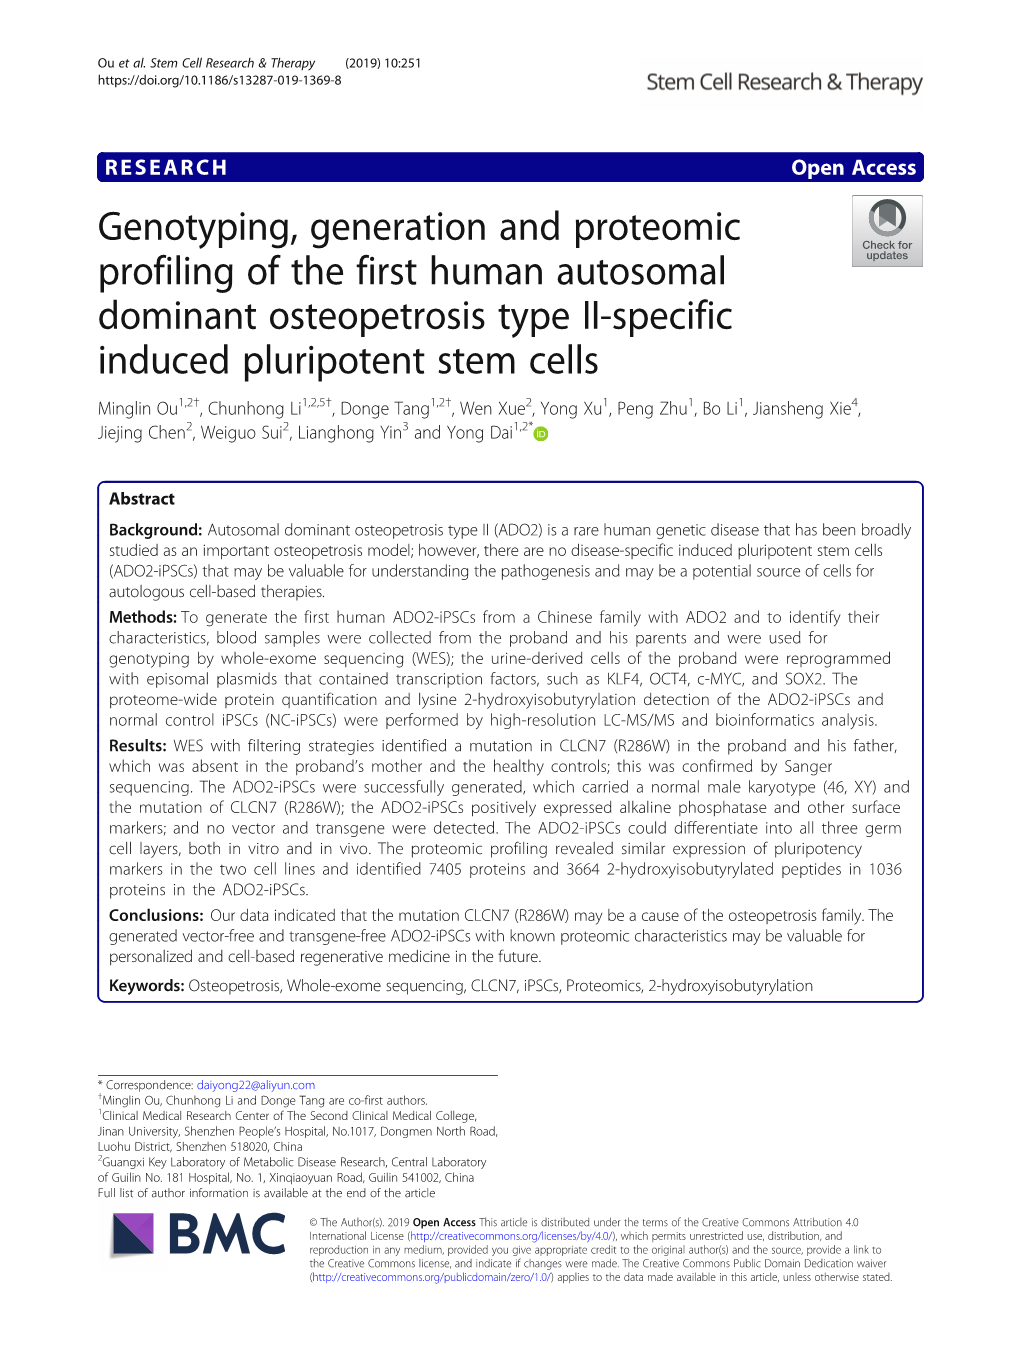 Genotyping, Generation and Proteomic Profiling of the First Human